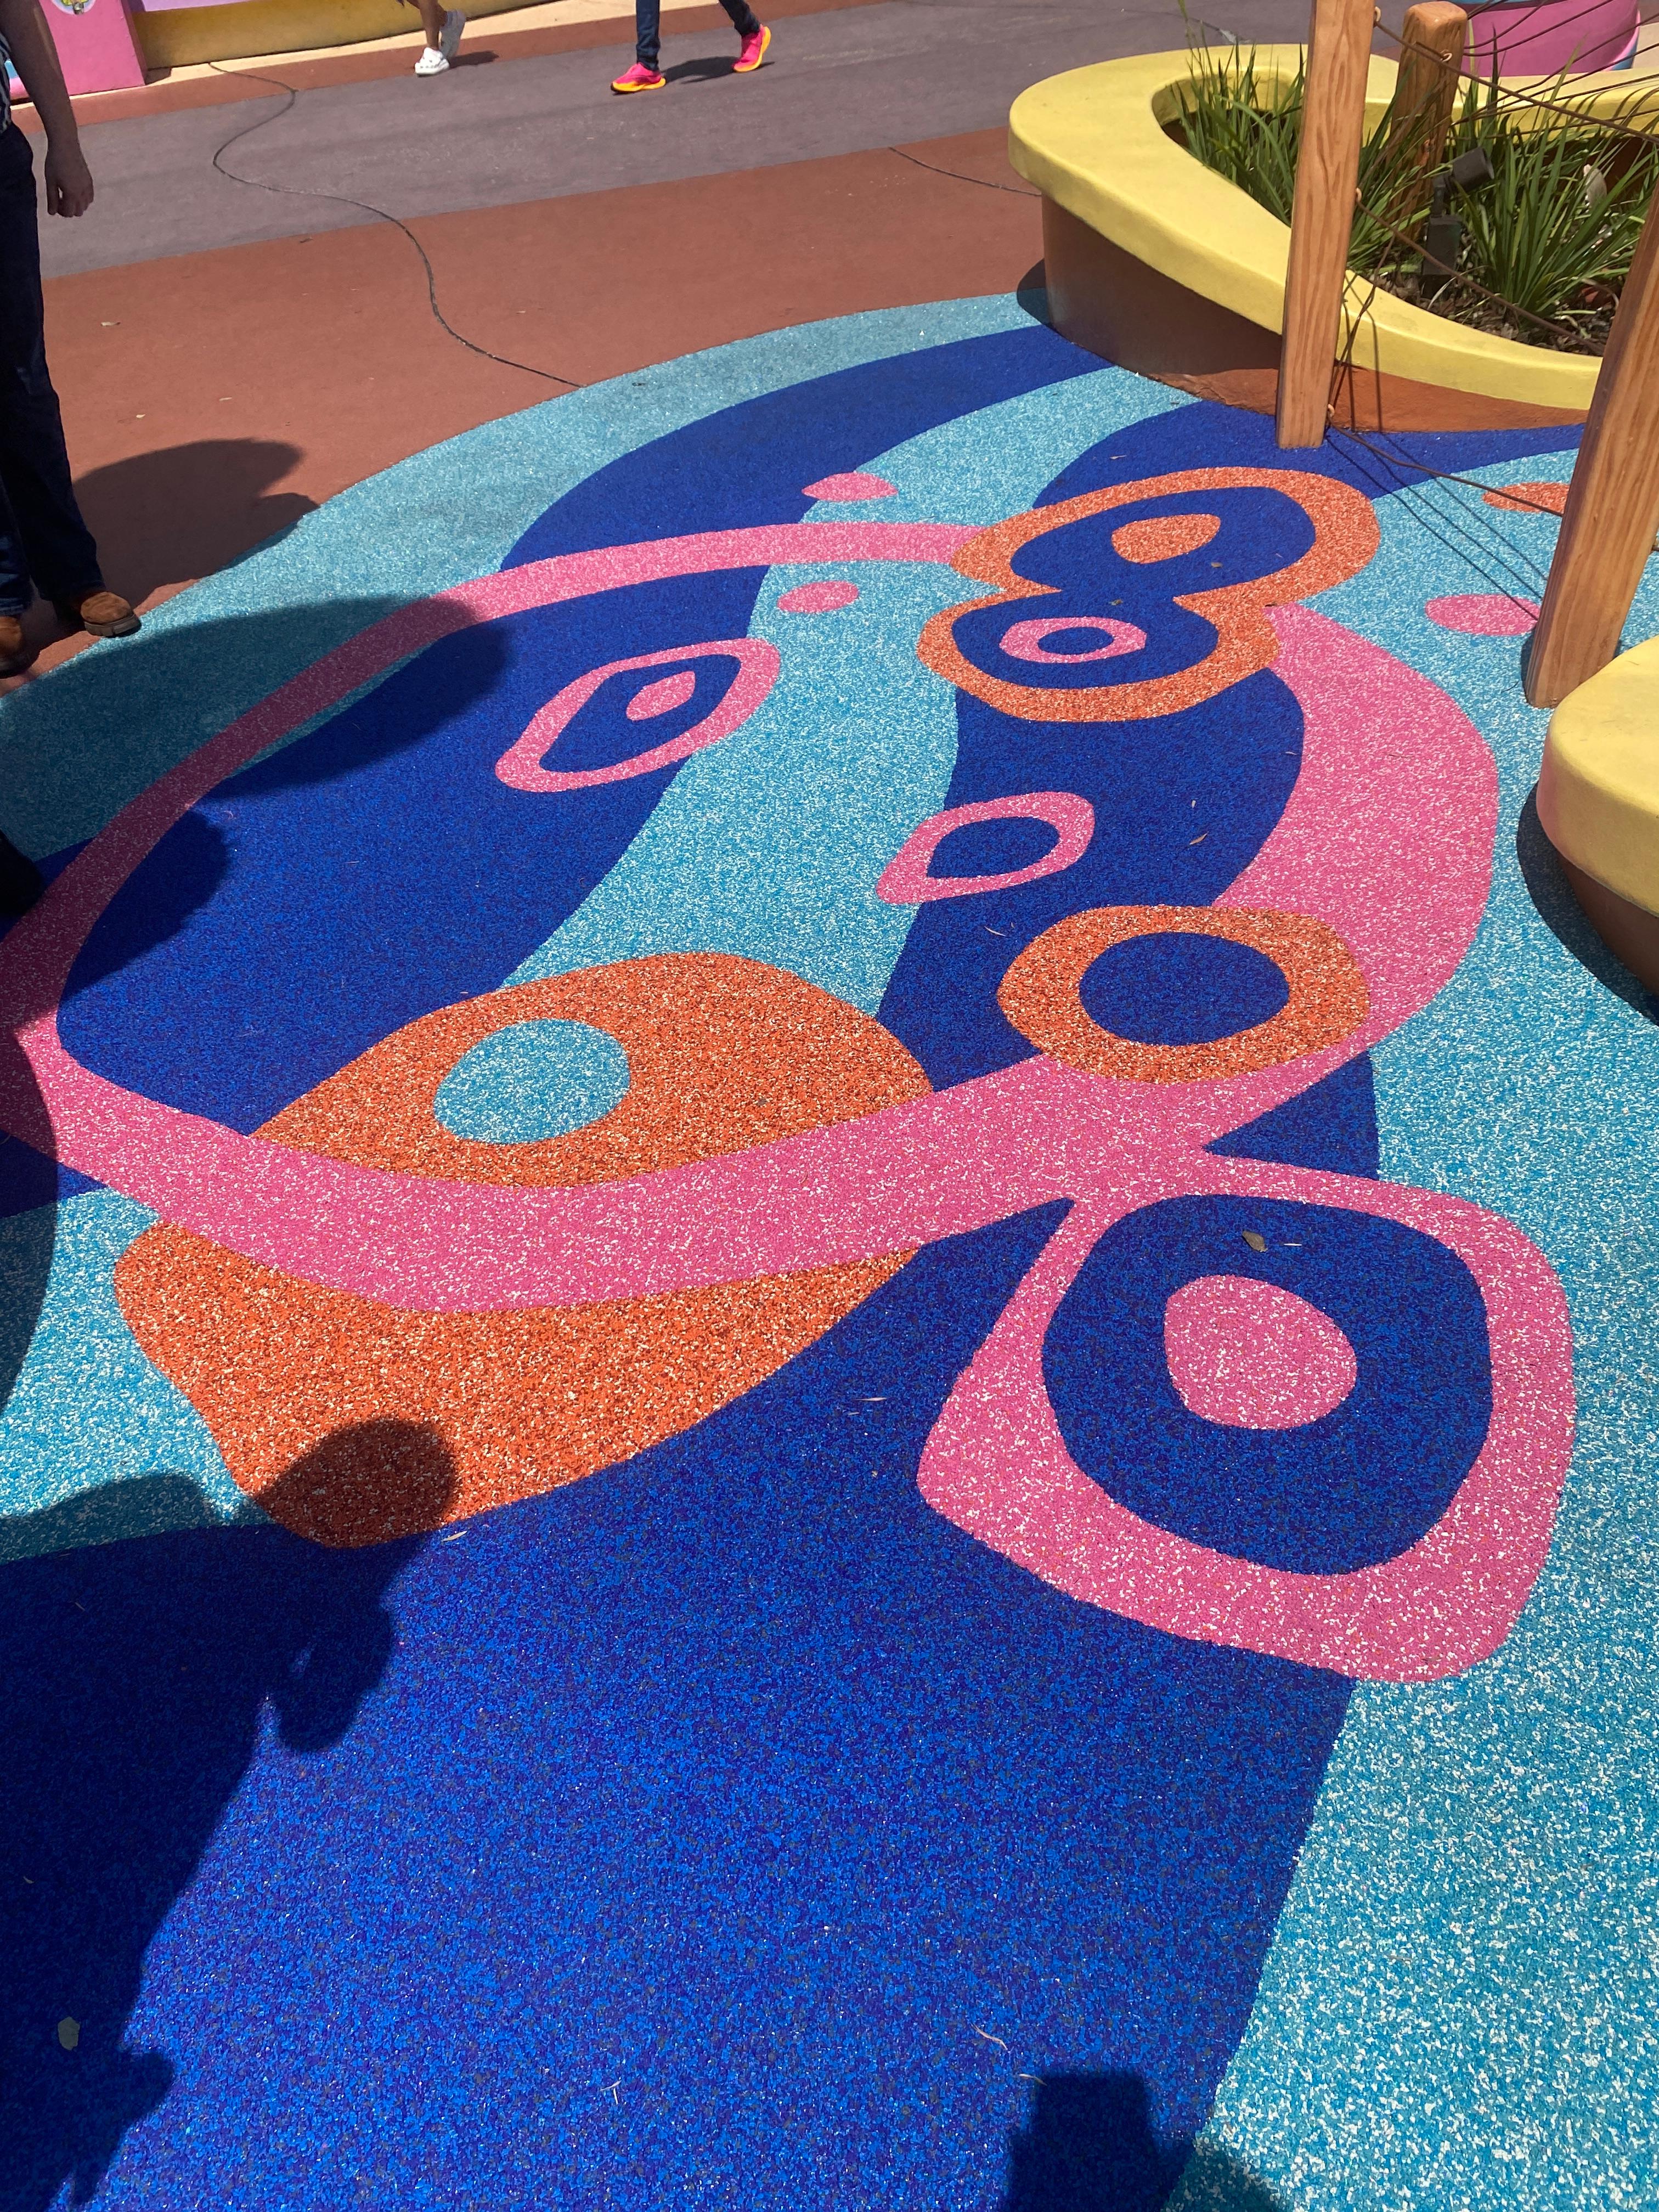 We Love Colorful Rosehill TPV Surfaces!